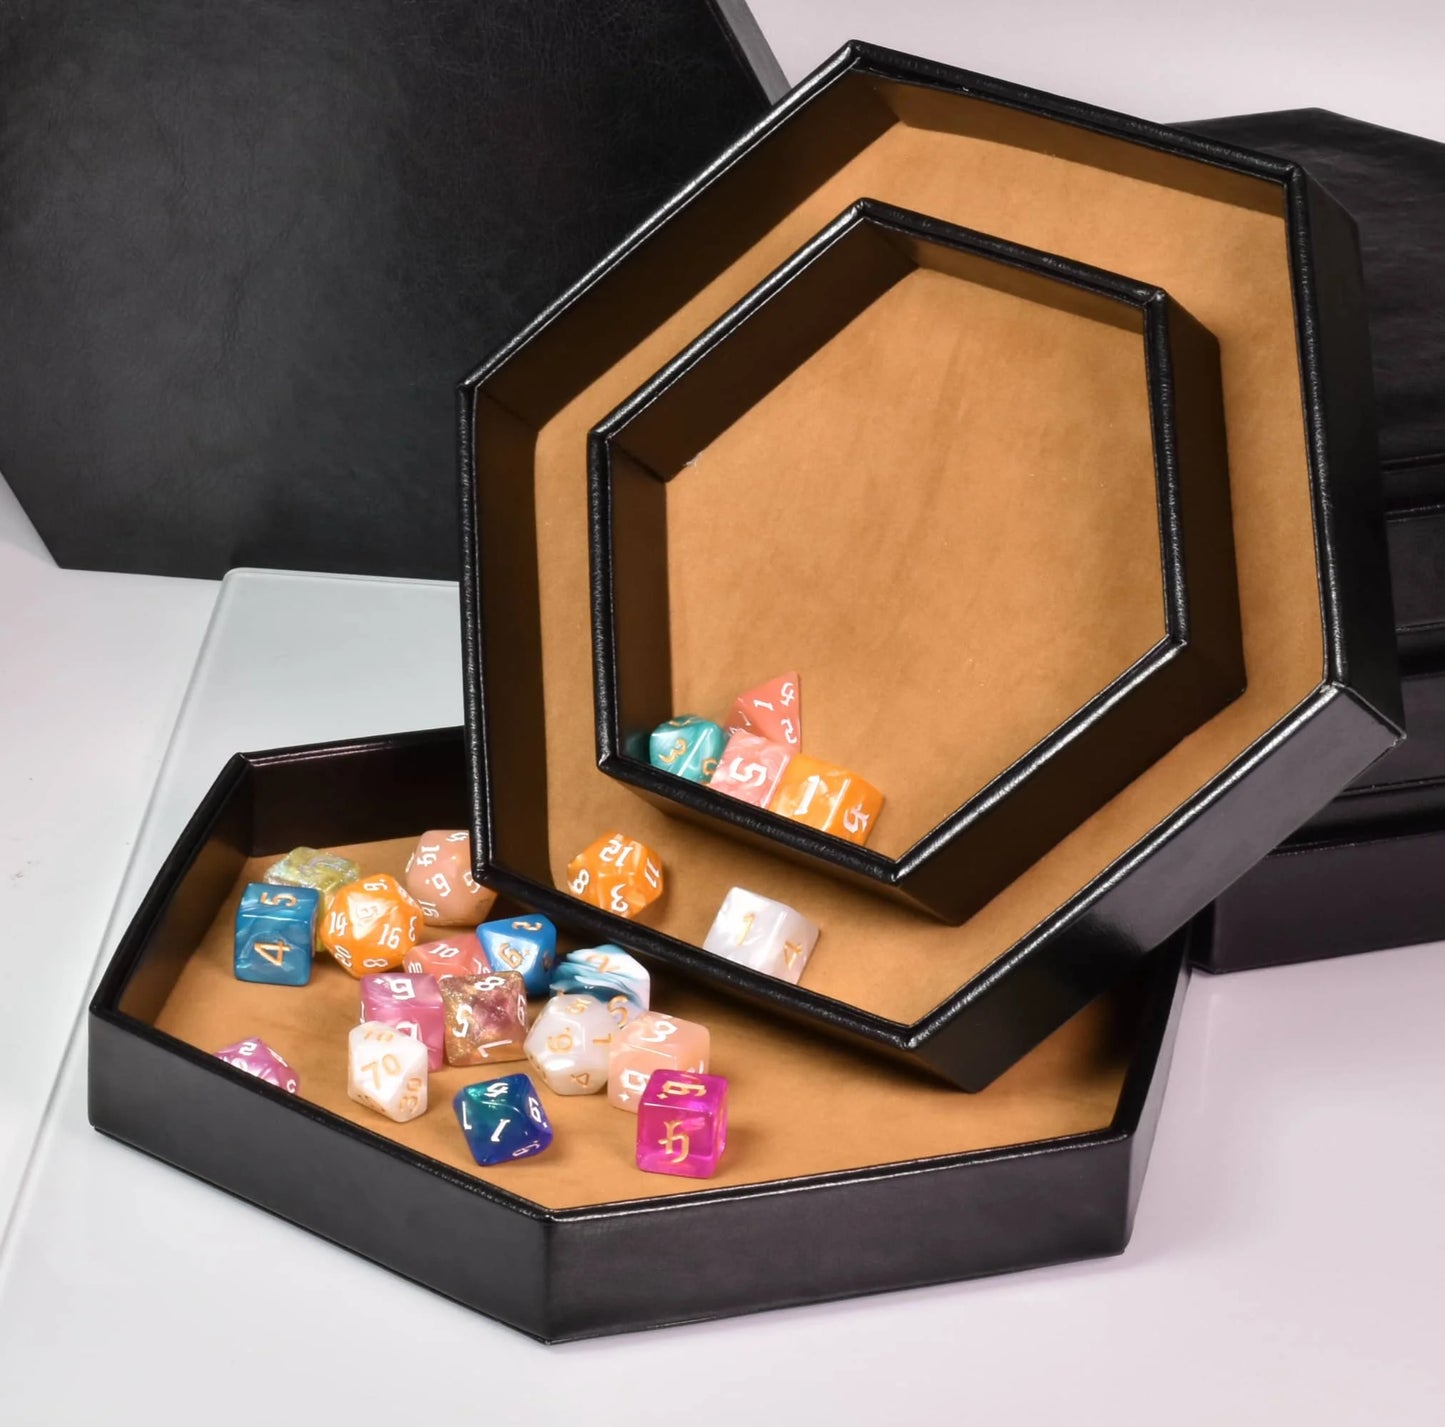 2 in 1 D&D Dice Tray & Dice Box Dice Case Hexagon Dice Rolling Tray Dice Holder PU Leather for Dice Games RPG Table Games